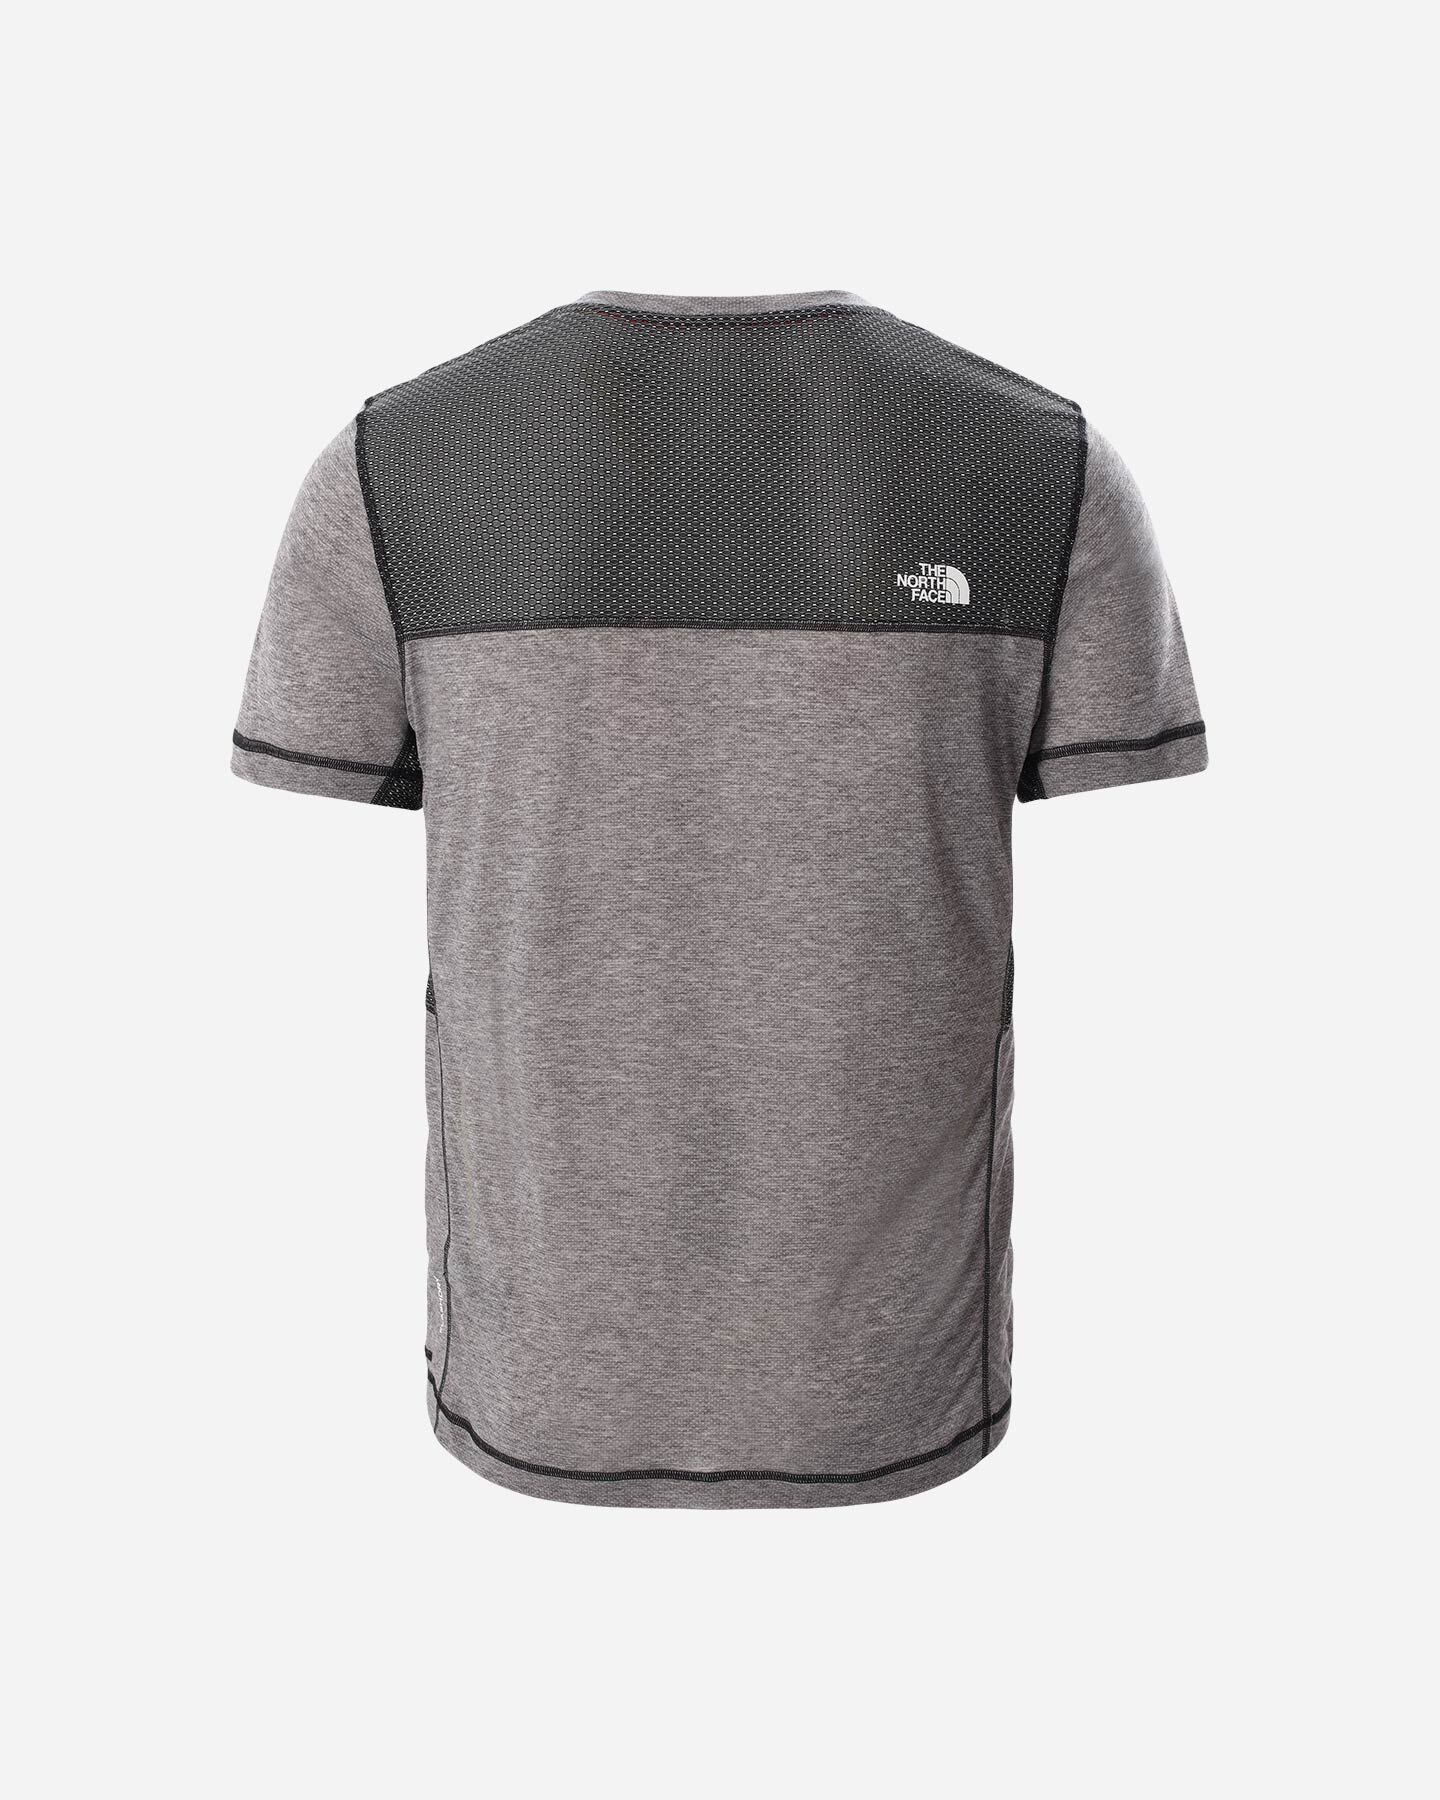  T-Shirt THE NORTH FACE CIRCADIAN M S5293211|WVV|S scatto 1